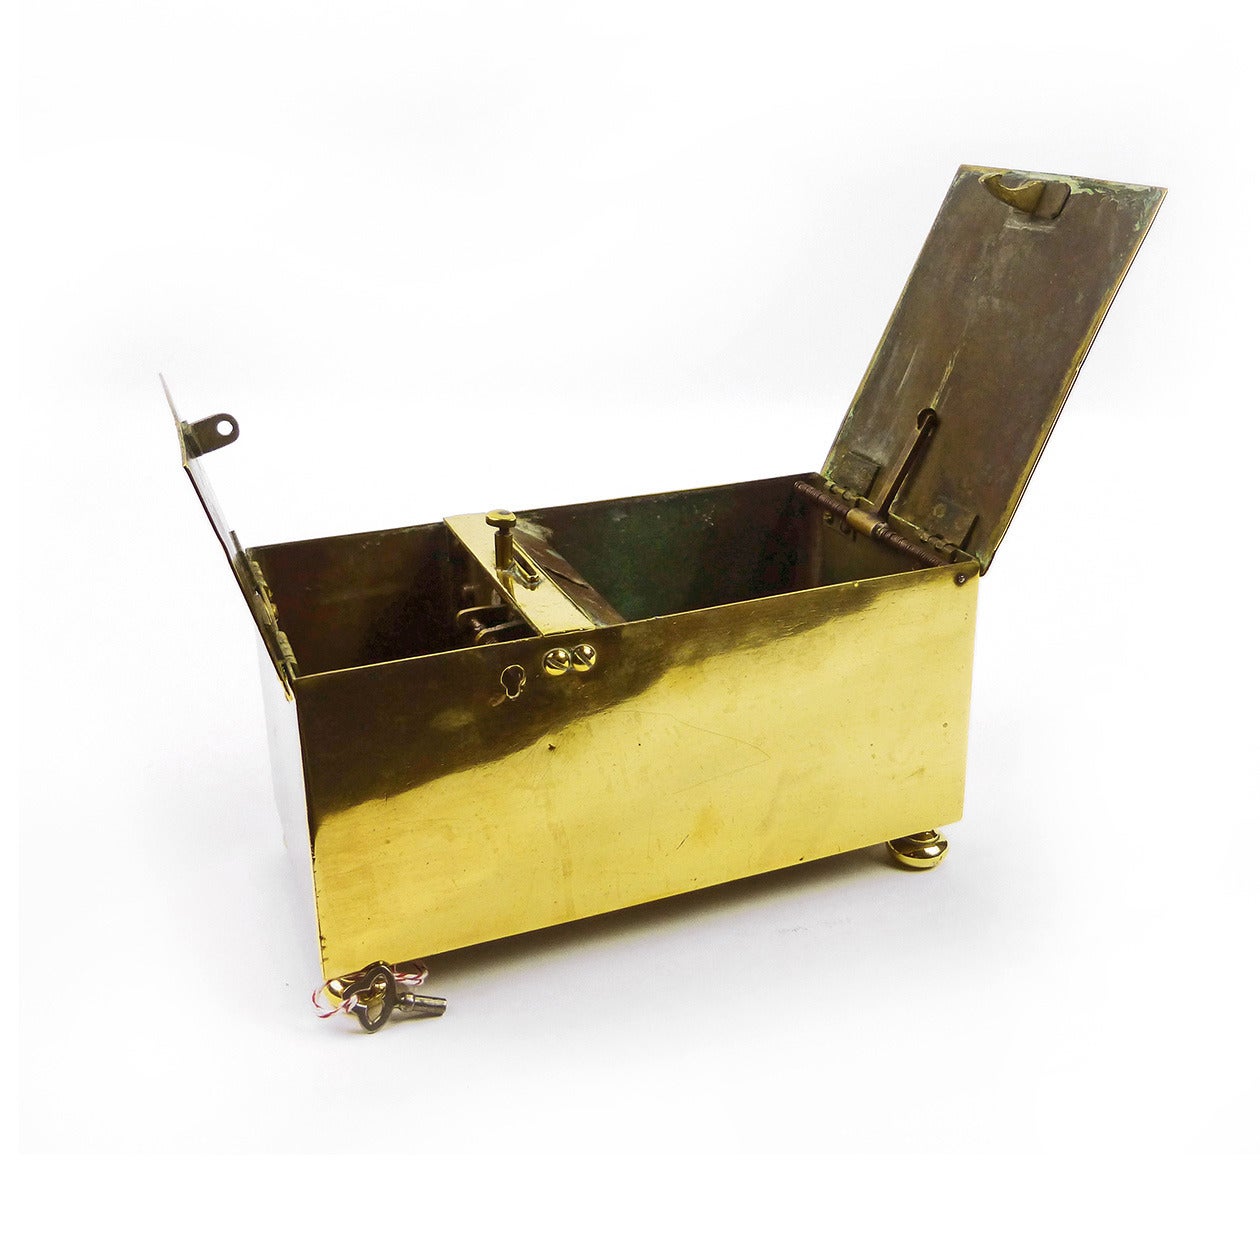 Fine English Brass “Honor” Tobacco Box Circa 1850

“A halfpenny dropped into the till,
Up springs the lid and you may fill;
When you have filled, without delay,
Shut down the lid or sixpence pay.”
 

In Working Order.

Length 9 3/8″, Width